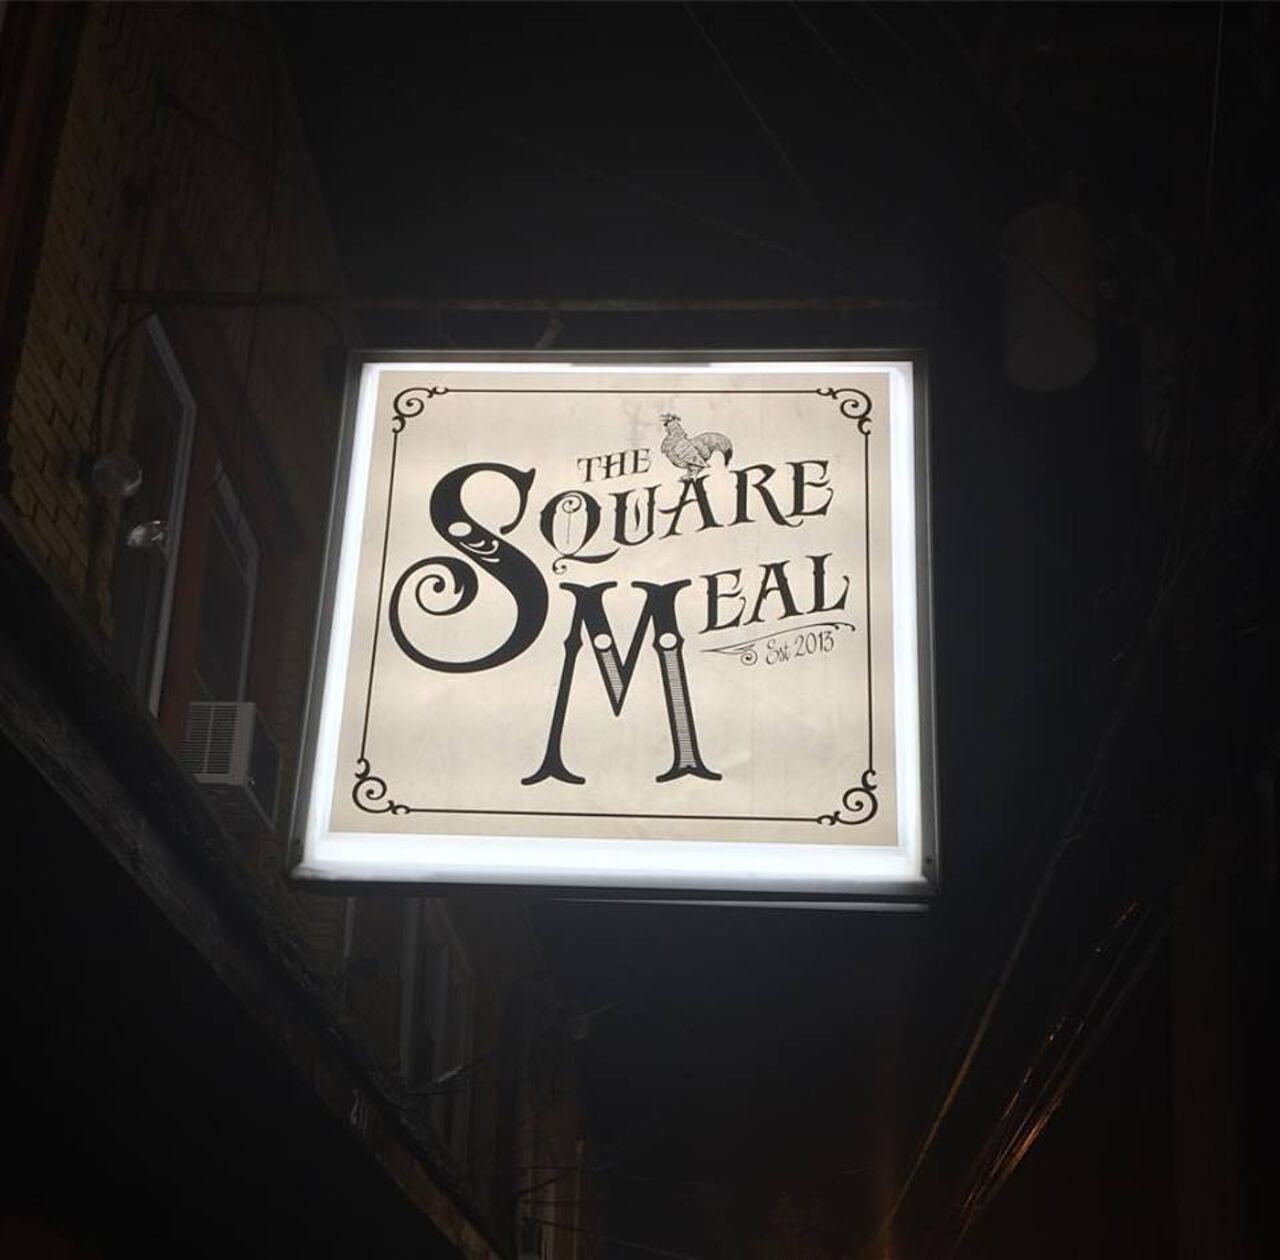 A photo of The Square Meal